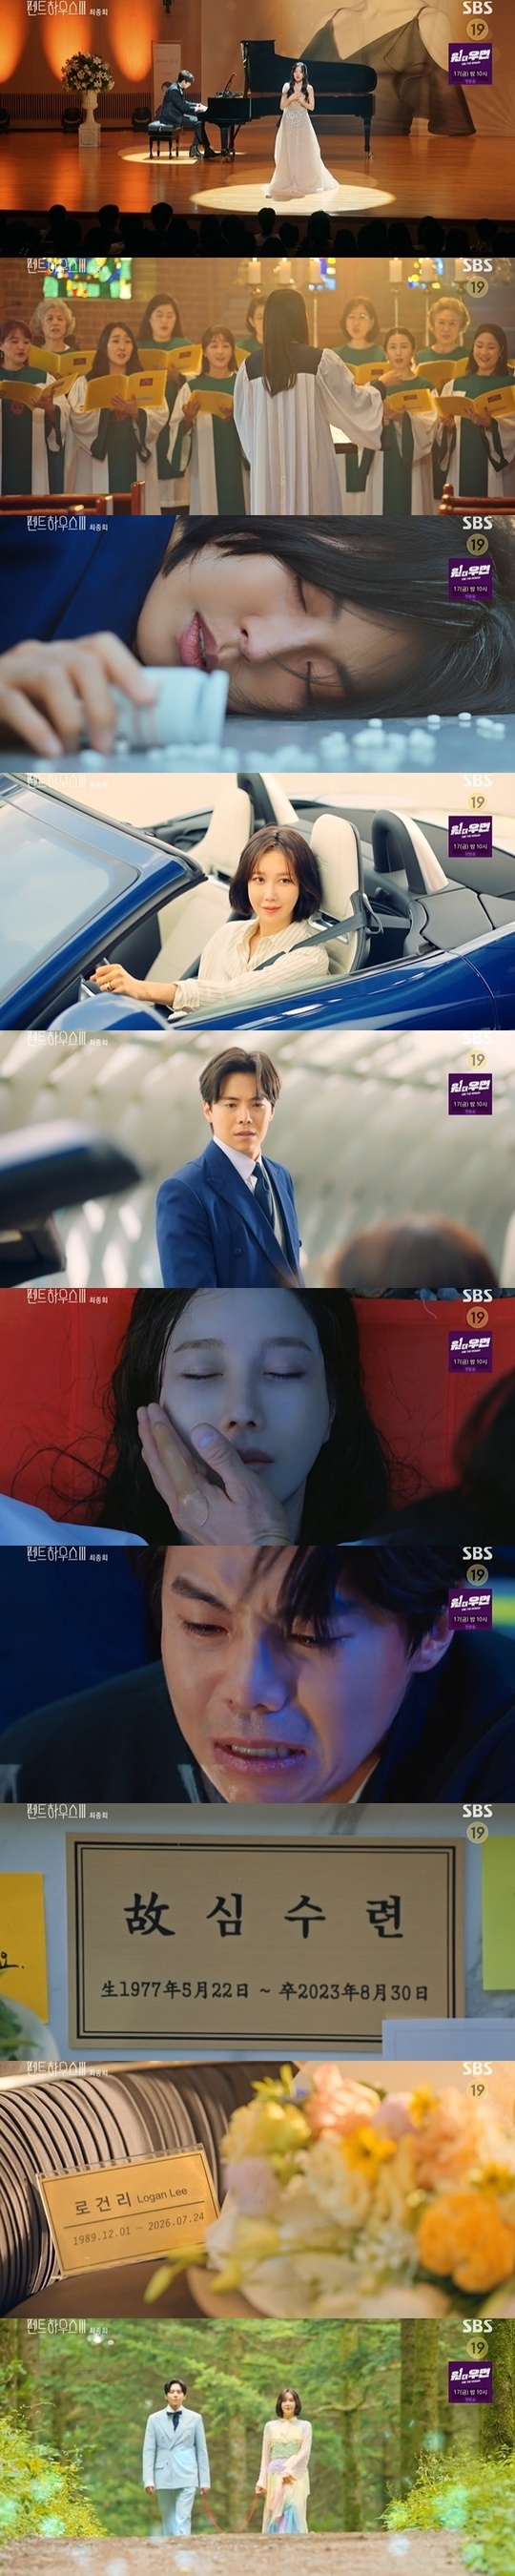 Penthouse was a shocking ending with Lee Ji-ah, Park Eun-seok and Kim So-yeon all dying.In the final episode of the SBS Friday drama Penthouse 3 (played by Kim Soon-ok, directed by Ju Dong-min), which was broadcast on September 10, three years after Shim Soo-ryun (Lee Ji-ah) completed his revenge, he was portrayed.On the same day, Chun Seo-jin (Kim So-yeon) was arrested and tried for murdering Oh Yoon-hee (Yujin) and pushing Shim Soo-ryun (Lee Ji-ah) off a cliff.Chun Seo-jin insisted on early dementia as originally planned, but the truth was revealed as HAEUN star (Choi Ye-bin) stepped up as the judges Innocent Witness.HAEUN star said that Chun Seo-jins claim of dementia was a lie, My mother is remembering everything. She killed a trainee because she remembers everything.My mother has never been true to her daughter, she said.I was at the scene of the accident that day and watched my mother from beginning to end, and my mother pushed her to the end of the cliff to push her to the end of the cliff.She pushed her deliberately. I looked at Innocent Witness, my eyes.When my mother killed my grandfather ( Chun Myeong-soo, Jung Sung-mo) to become the chairman of the Cheong-a Foundation, and when I killed Oh Yoon-hee, who saved me, I was at the scene.I killed people only for my own benefit without any mental illness.HAEUN star said, The beginning of all these tragedies is me, referring to the sexual manipulation and murder that Chun Seo-jin has committed for him.And HAEUN star said, I can not fulfill my mothers expectations even if I wake up. I will not sing again.I will be punished, he said, and then hurt his neck. HAEUN star insulated Chun Seo-jin at the last minute of being carried out.Three years after Shims training fell off the cliff and Chun Seo-jin was sentenced to life imprisonment. Kang Ma-ri (Shin Eun-kyung) became the true winner of the Hera Pheri club.She still has a relationship with the chairman of the Haeyeon Group, Song (Jeong A-mi), and prepared to move into the 130th floor of the Shenwoon Palace Penthouse, which she has also donated 10 billion won to welfare facilities every year.And after three years, Bae (Kim Hyun-soo) graduated from Juilliard University early and returned to Korea in a splendid way.On the other hand, Lee Kyu-jin (Bong Tae-gyu) still went to collect investment without abandoning his business dream, and was sentenced again for fraud.Joo Seok-kyung (Han Ji-hyun) lived a life of earning tuition and paying monthly rent by doing vocal music teachers, alba, etc.Joo Seok-gyeong showed a kind of mind to a homeless person who was generous enough to buy meat with his money.Tian Seojin went out of prison in three years. This is where Tian Seojin visited.Chun Seo-jin left the room, only looking at the HAEUN star from afar, and the fact that it was revealed was that he had laryngeal cancer.On the day of Oh Yoon-hees performance and the day of Baes performance, all those who once lived at Hera Pheri Palace gathered.The accompanist was also a successful and active Joo Seok-hoon (played by Kim Young-dae) in Vienna, who found a blue rose that someone had sent before the performance.Bae Rona said that someone sent a flower every time, but I do not know who sent it, and Joo Kyung, who was in the spot together, said, Thats the flower my mother liked.And Kang-mari, who was walking in the lobby of the theater, found someone and showed a pause.Bae mentioned the two people before the performance.The first was Logan Lee (Park Eun-seok), the head of the Simun Art Center, who supports himself in both ways, and Oh Yoon-hee, the mother who tried to do everything for herself.Bae dedicated her first song to Oh Yoon-hee.With everyone impressed, Shim Soo-ryun, who had been missing since falling off the cliff three years ago, was also watching the show at the back of the day.Logani, who had lived like everyone else knowing she was dead, was shocked to meet her eyes first with this mental training.Meanwhile, the meeting between HAEUN and Chun Seo-jin was not achieved.On the day when HAEUN star forgave her for three years and left the chorus service to the prison, Chun Seo-jin was lonely death looking at his daughter HAEUN star from afar.Im sorry for everything. Im not going to burden my daughter. Dont live like a mother. You must be happy.I love you.Shim Soo-ryun appeared in front of Logani with a dignified smile and asked, Will you come with me, Logan? The truth of three years ago.Three years ago, Shim said to a dying Yoon-chul, Do not kill Seo-jin, let the silver star live as a mother, not a bad child from the beginning.I was so poisoned by a man like me. I will carry a sin. After that, Shim was skeptical that too many people died because of my revenge and the children lost their parents, everything seems to be my fault.But the heart-drawn tried to continue revenge, and Logani worried about the heart-drawn, saying, Its a specially made life jacket, and even if you get swept away by the rapids, your body will come up soon.Even if the worst happens, it will not take long to find Mr. Suri. Logani also said, No matter where you are, we will be together.I am always behind you, he said.However, GPS positions were not located after the heart train fell off the cliff.Logan, who was uneasy somewhere in the situation where the heart training was not found for three days, went into the room where she stayed and found the ring she had left.The mind-training had been on a cliff without any safety equipment Logan had given him, and Logani realized it late and shed tears in despair.The truth is that he jumped into the cliff himself. He was dying and said, I once dreamed of you and Happiness.There were many moments when I didnt want to leave you forever, but I lost too many precious people to dream about.Im asking them to forgive me. I dont think our deaths were in vain. Thats what we kept our children.You promised to make me happy, and it was a happy life thanks to you. The reversal continued: in fact, Logani was dead too. Loganis photo was before the show. How are you? Too long.Thank you for the invitation. Im relieved to see you smiling. Dont get sick there. Logans death was a recurrence of bone marrow cancer.